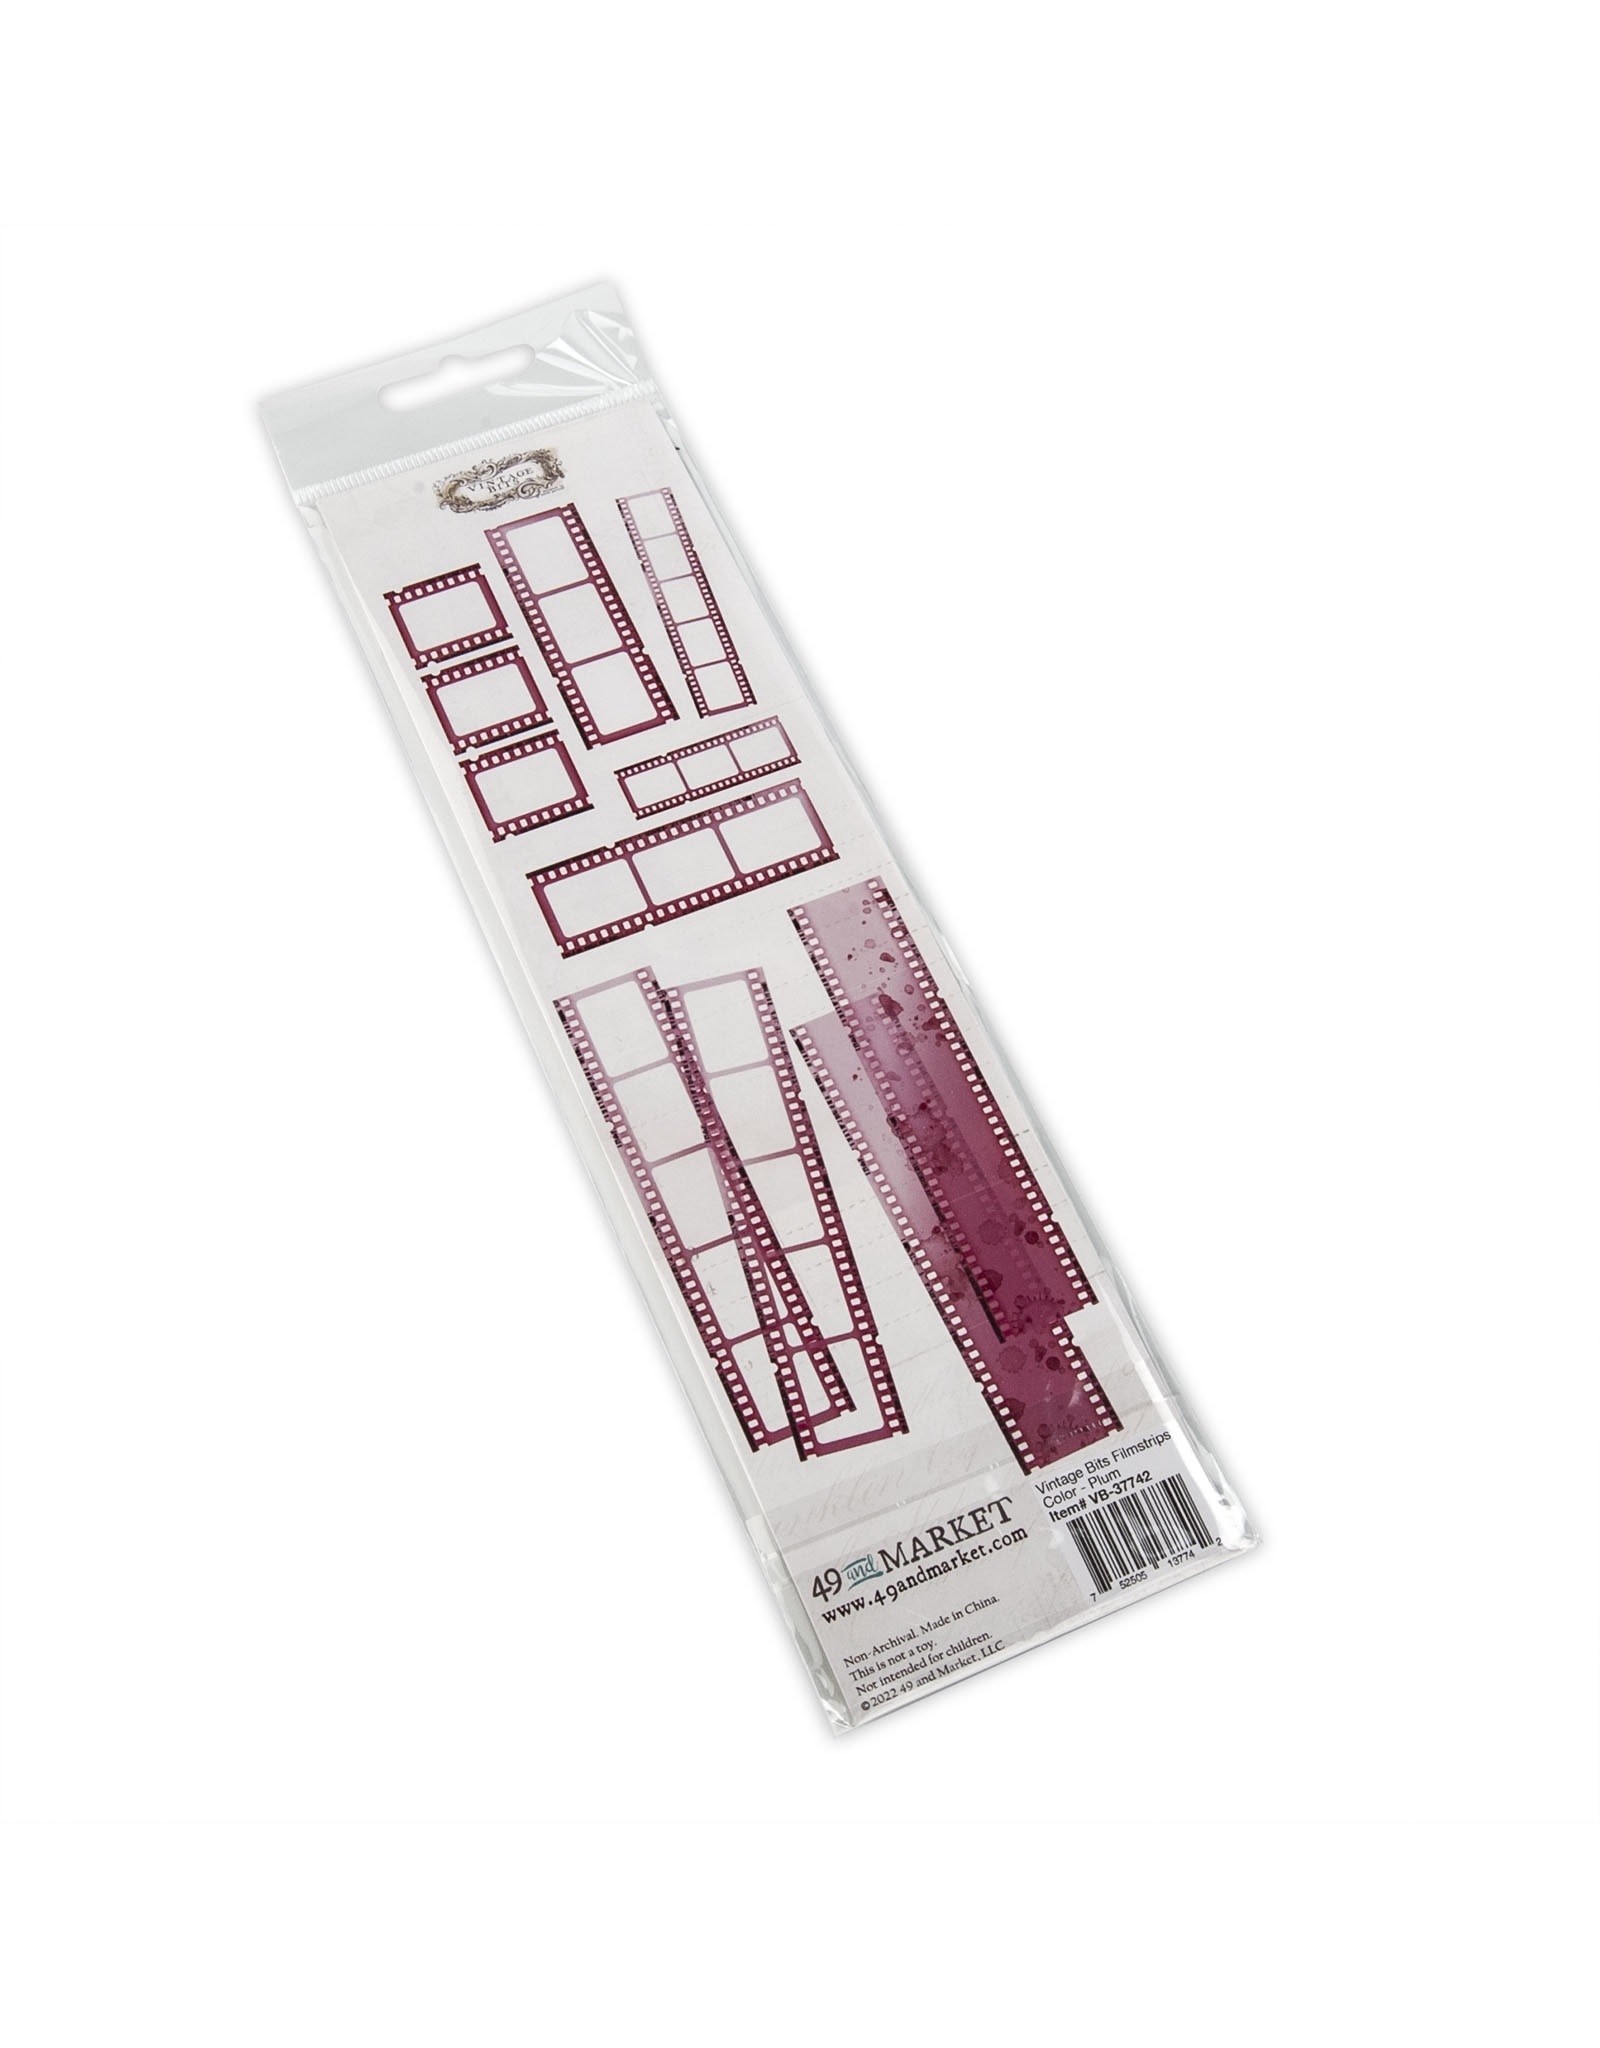 49 AND MARKET ESSENTIAL FILMSTRIPS - PLUM